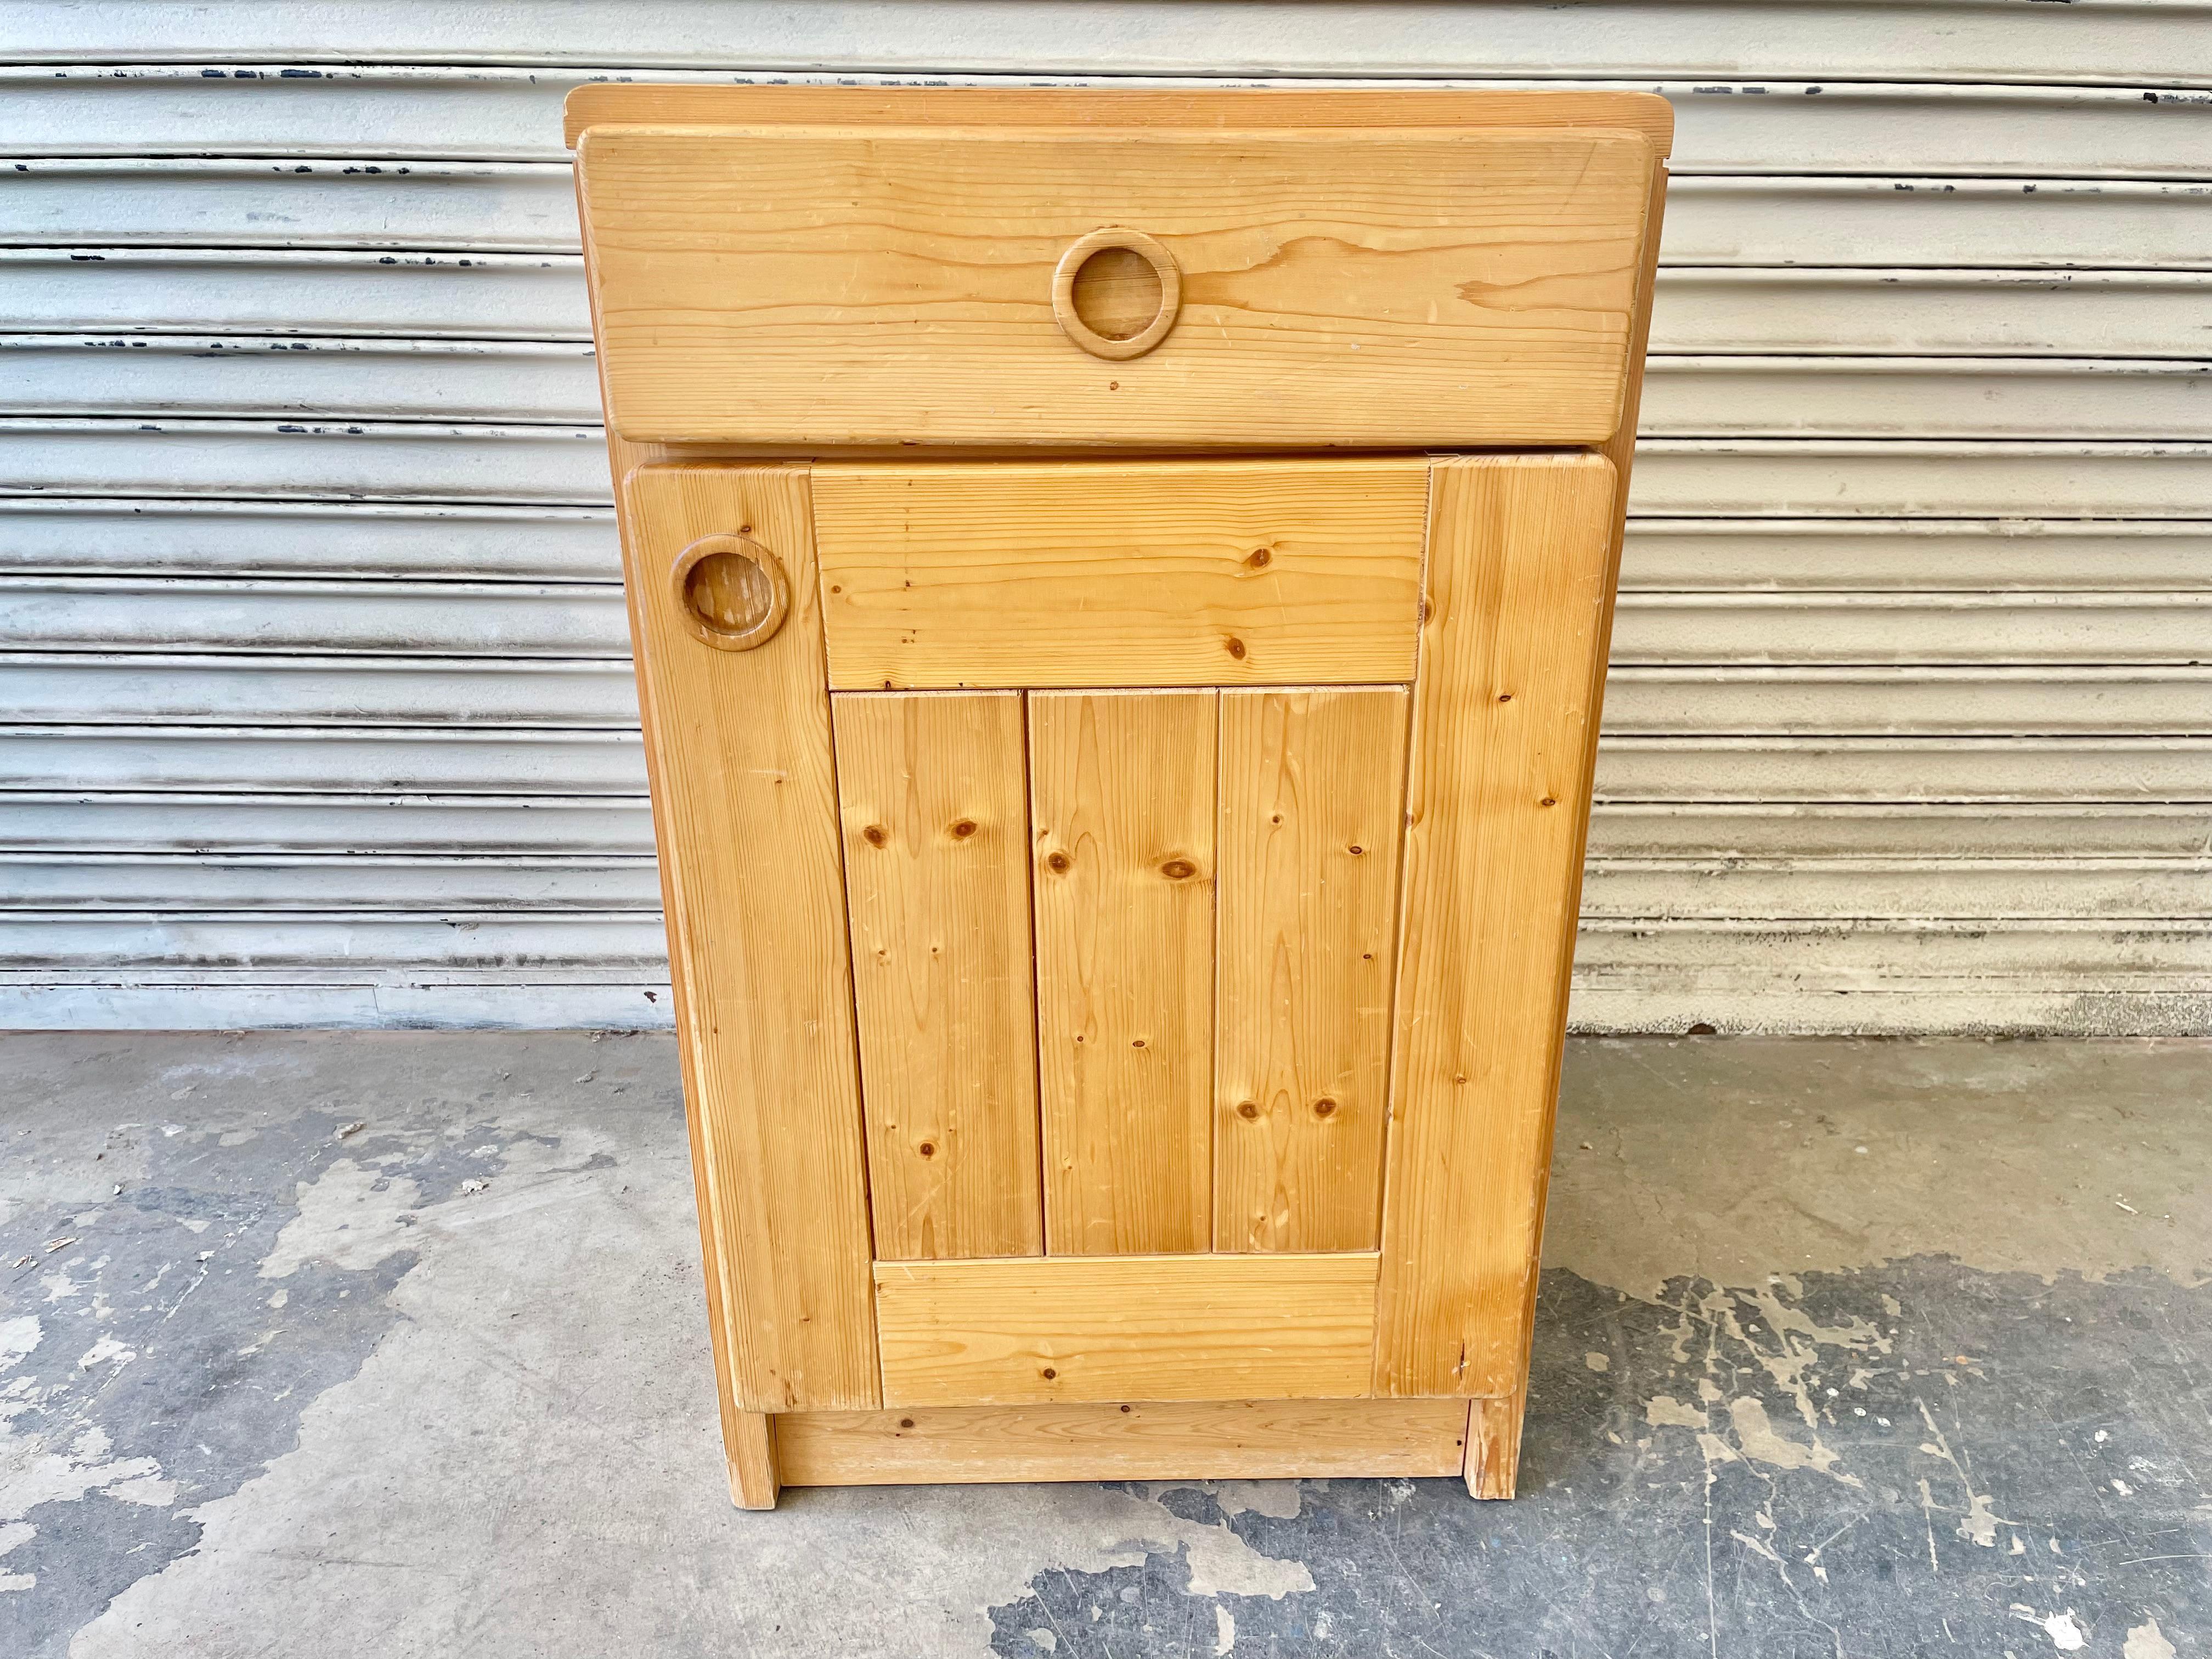 Pin bedside cupboard by Charlotte Perriand for Les Arcs. One pull out drawer. One door which opens to a shelf with two spaces for storage. Made of solid pine, circa 1960. Good original condition. Fun piece of collectible design from the popular